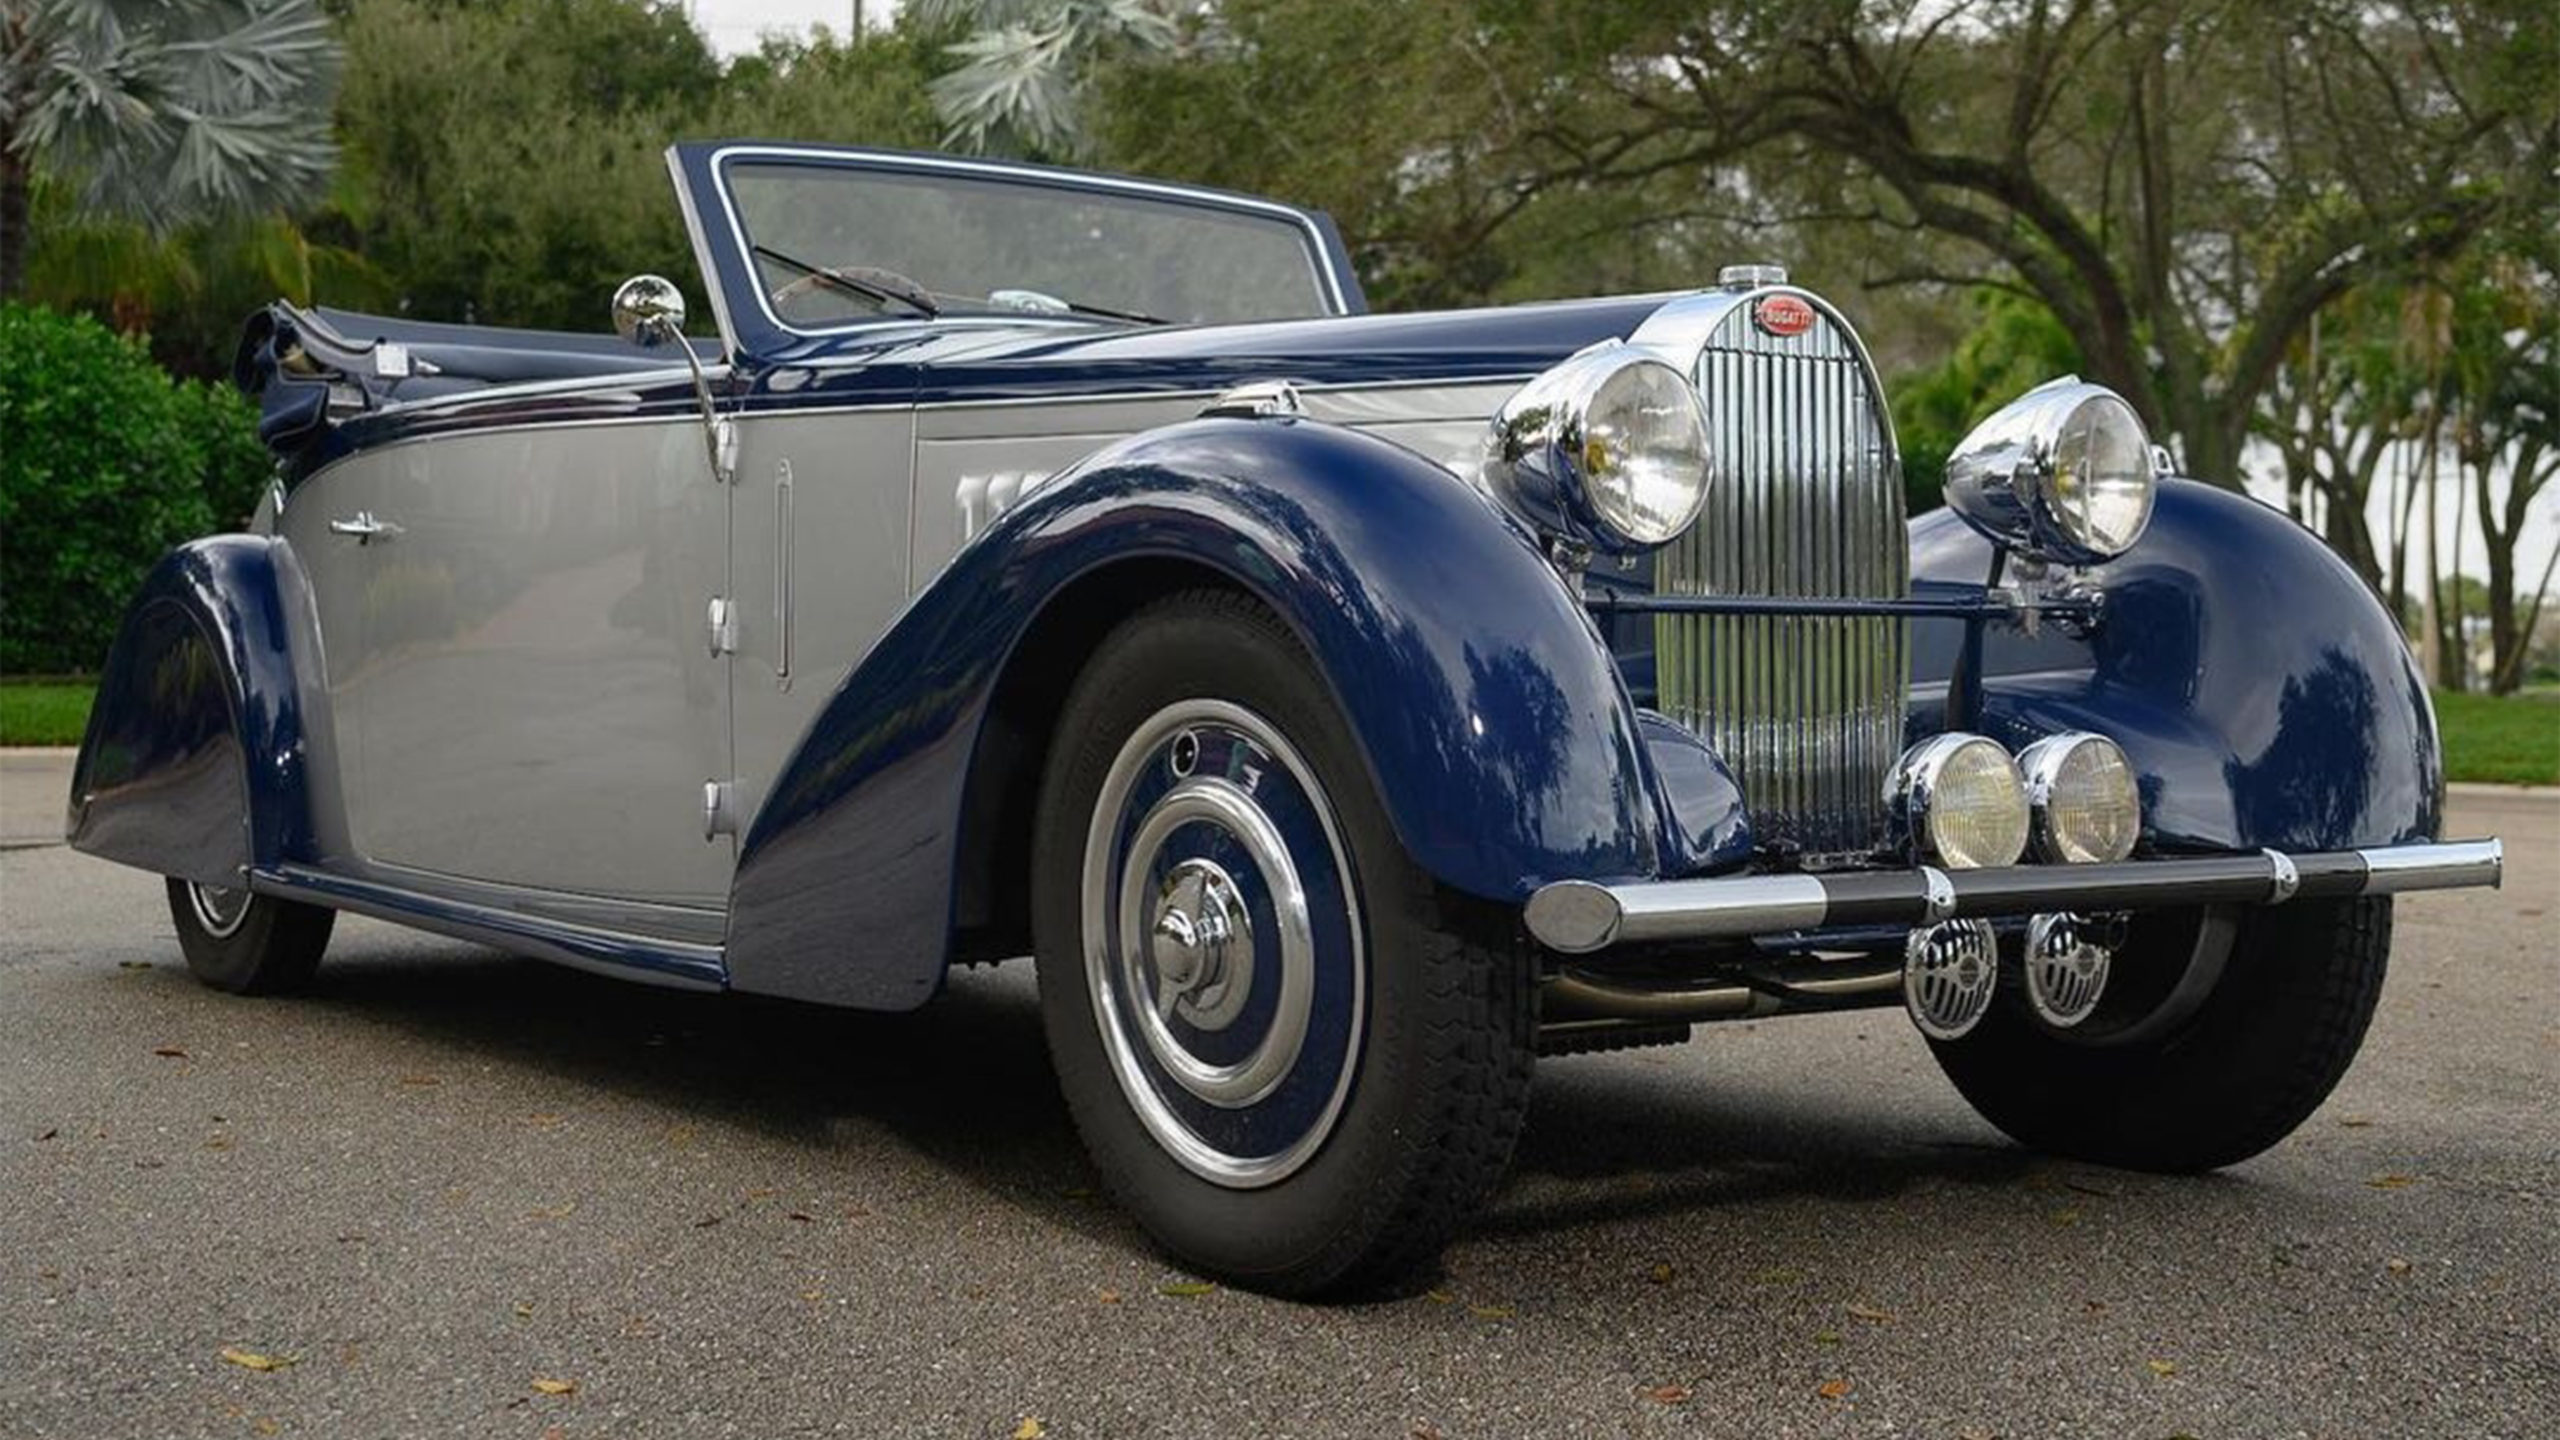 The 1934 Bugatti Type 57 Stelvio: A Grand Tourer Car Built to Last for Generations